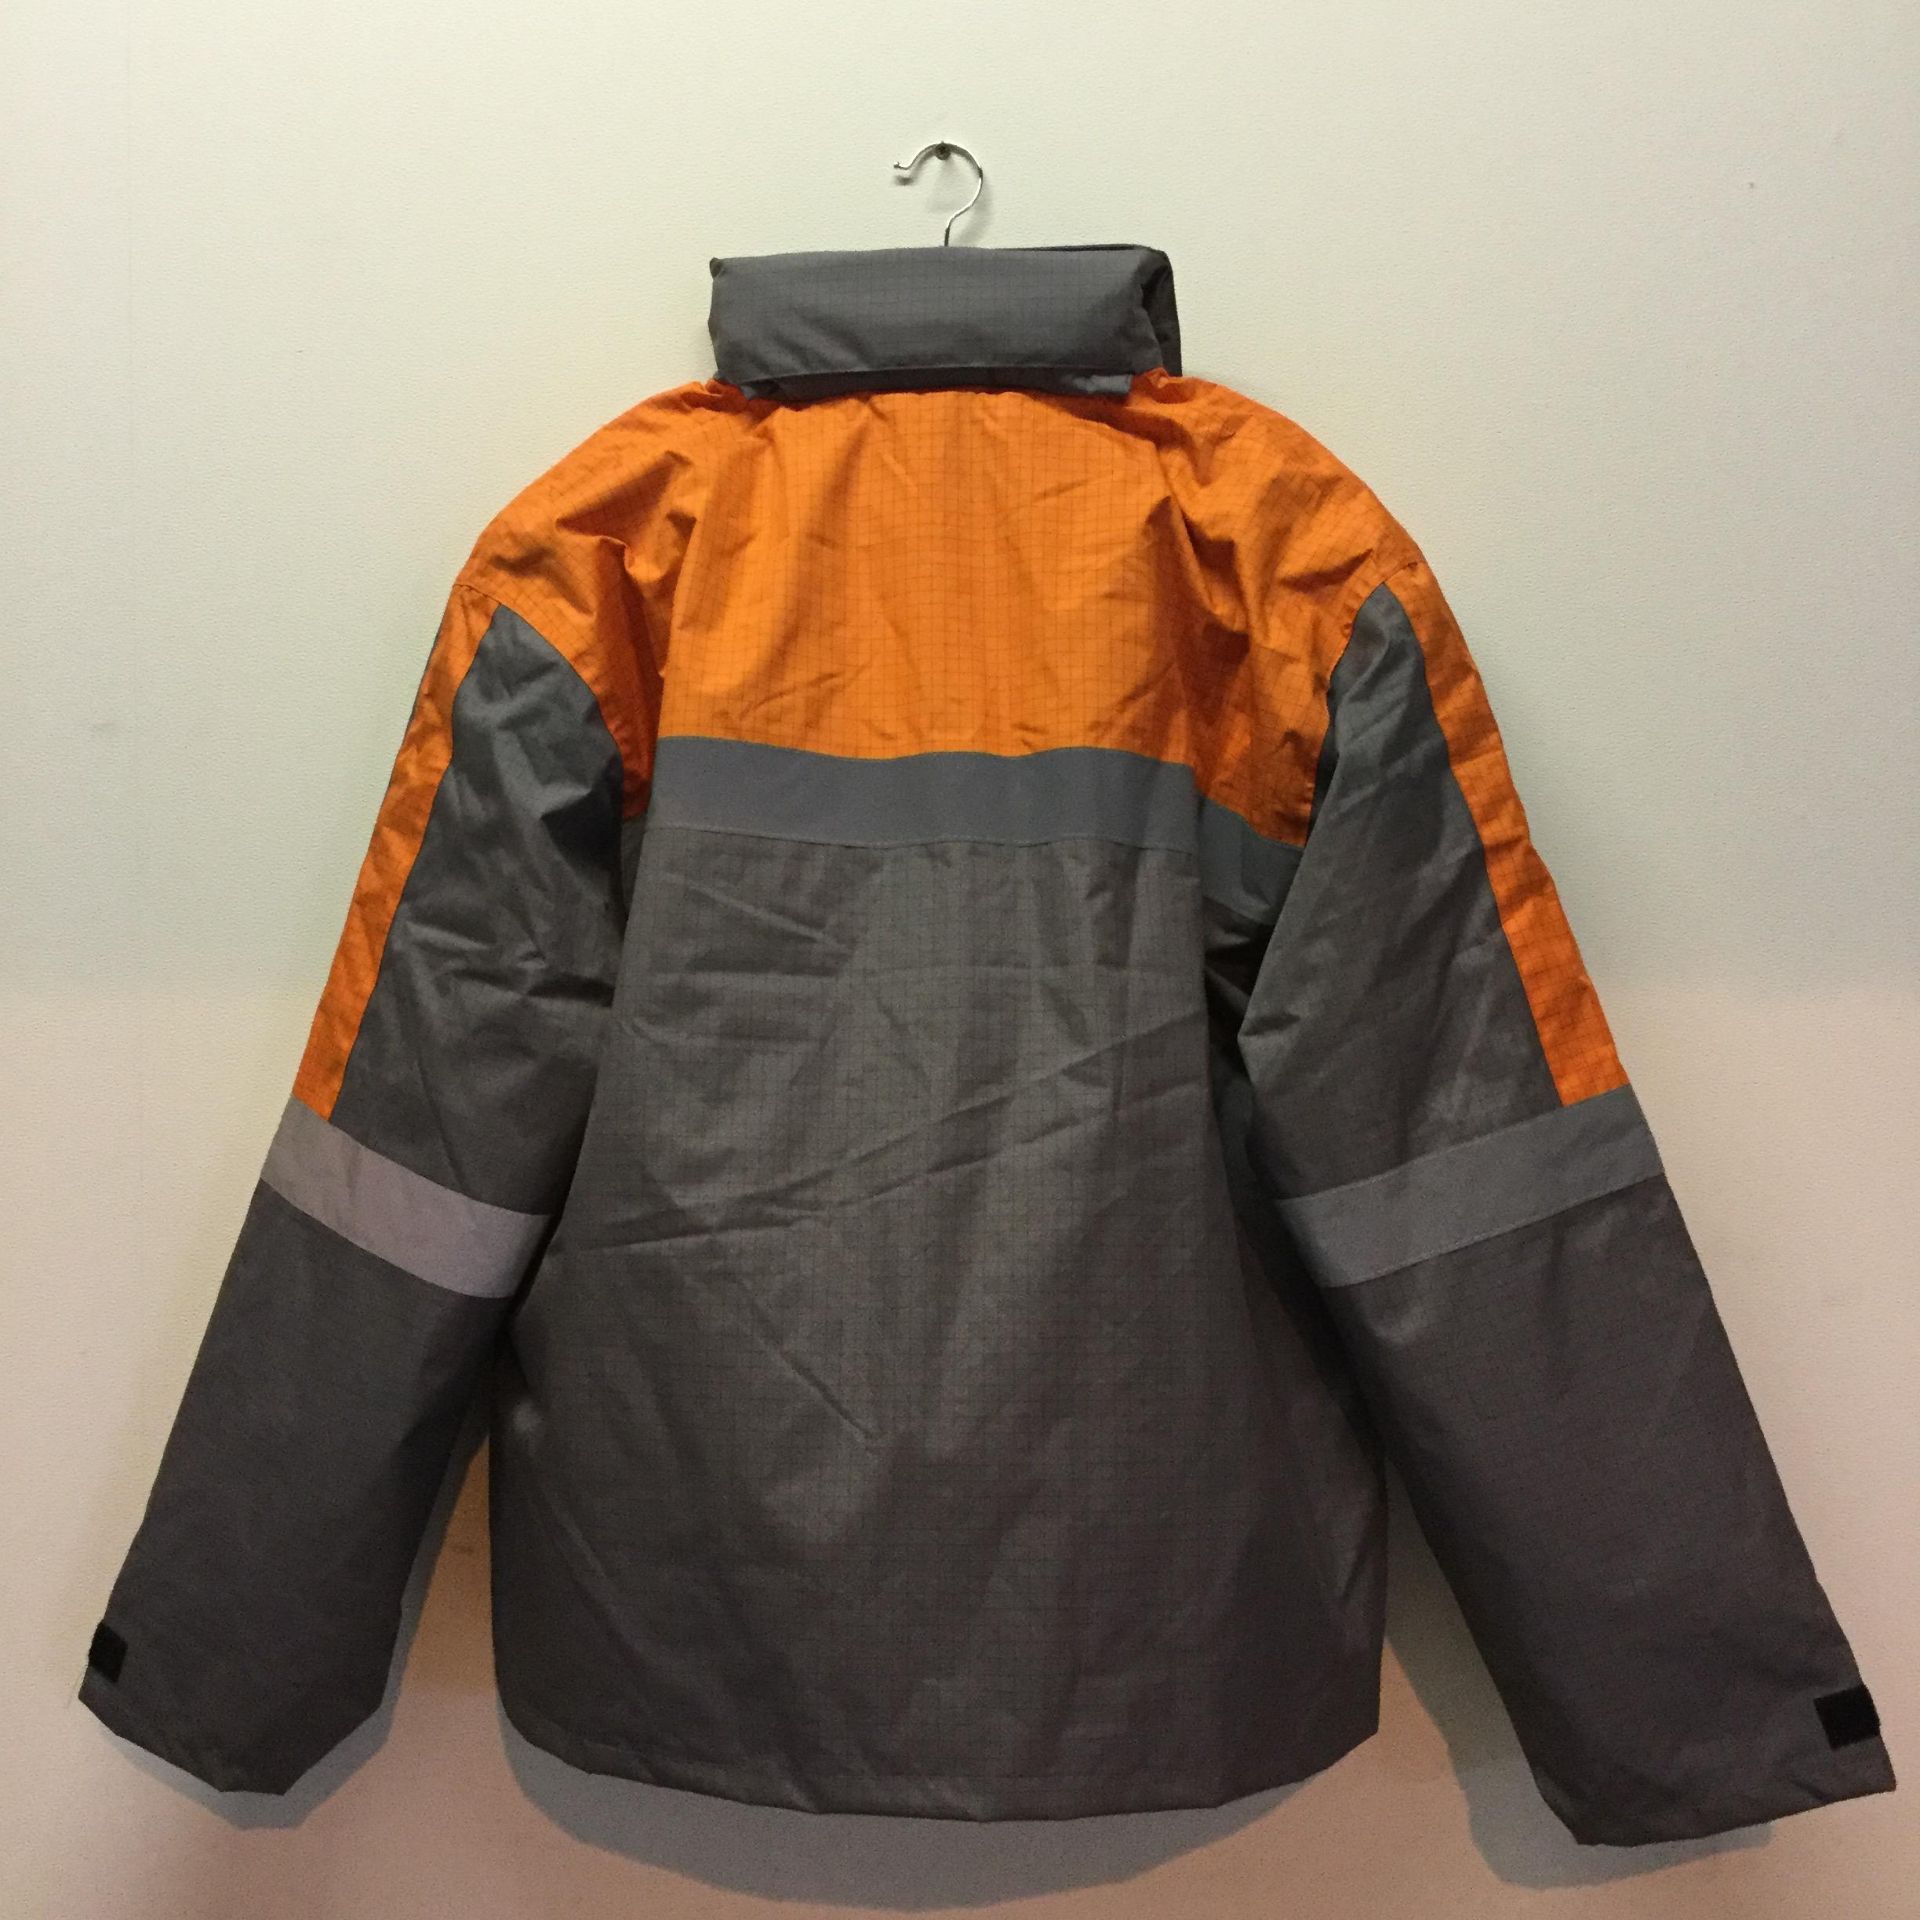 All Weather 3 layer Gortex Antistatic waterproof Jackets- Size 56 - Image 2 of 2